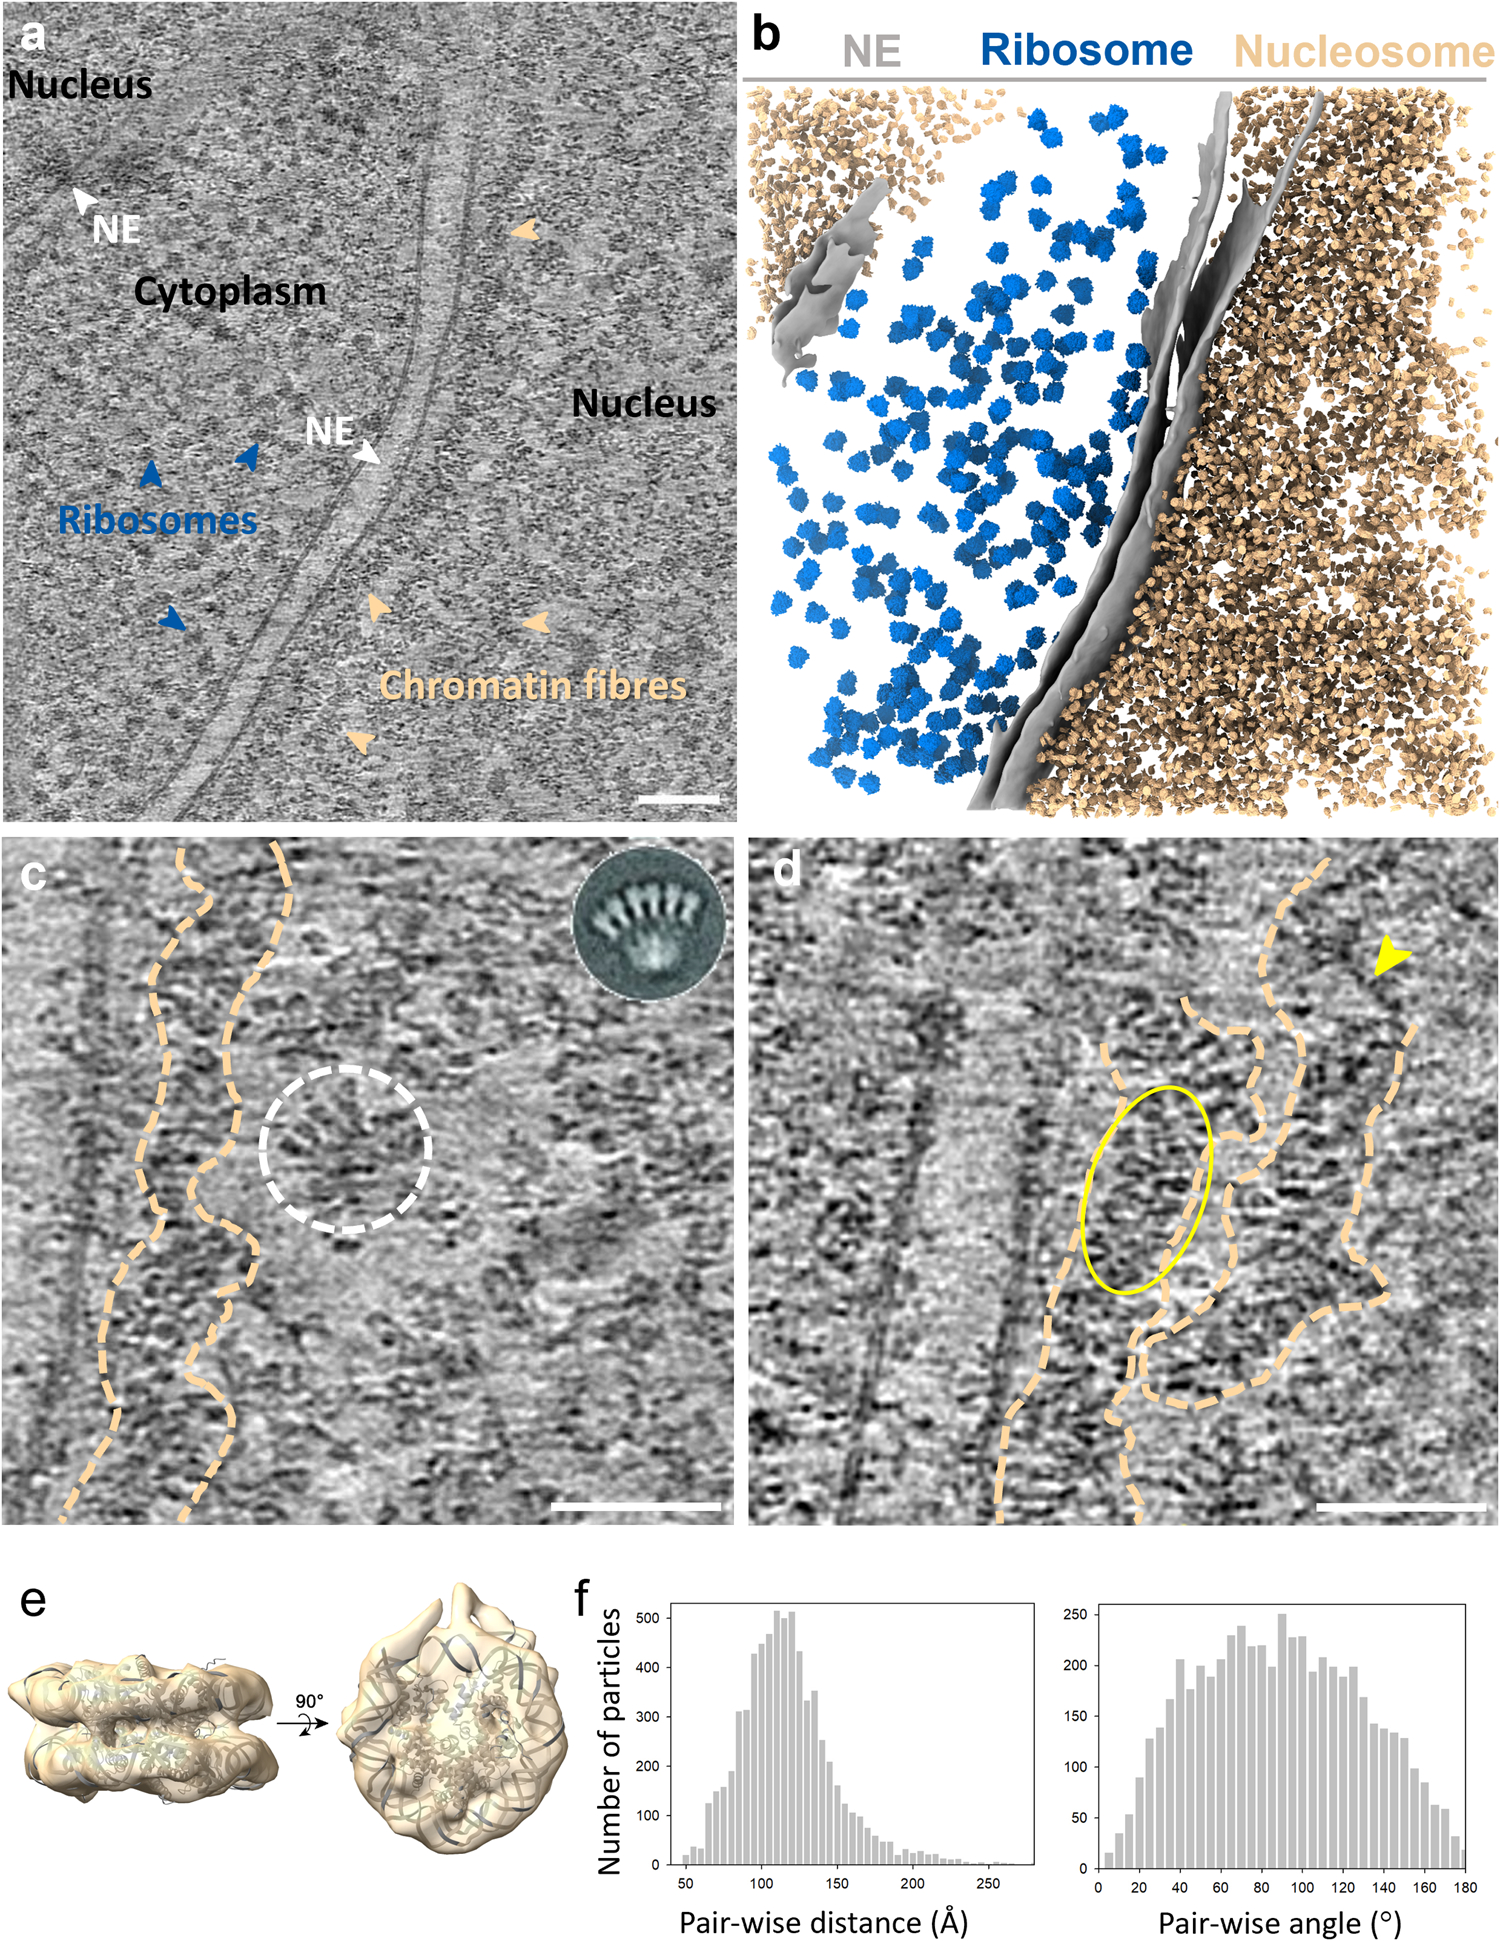 Structure of native chromatin fibres revealed by Cryo ET in situ